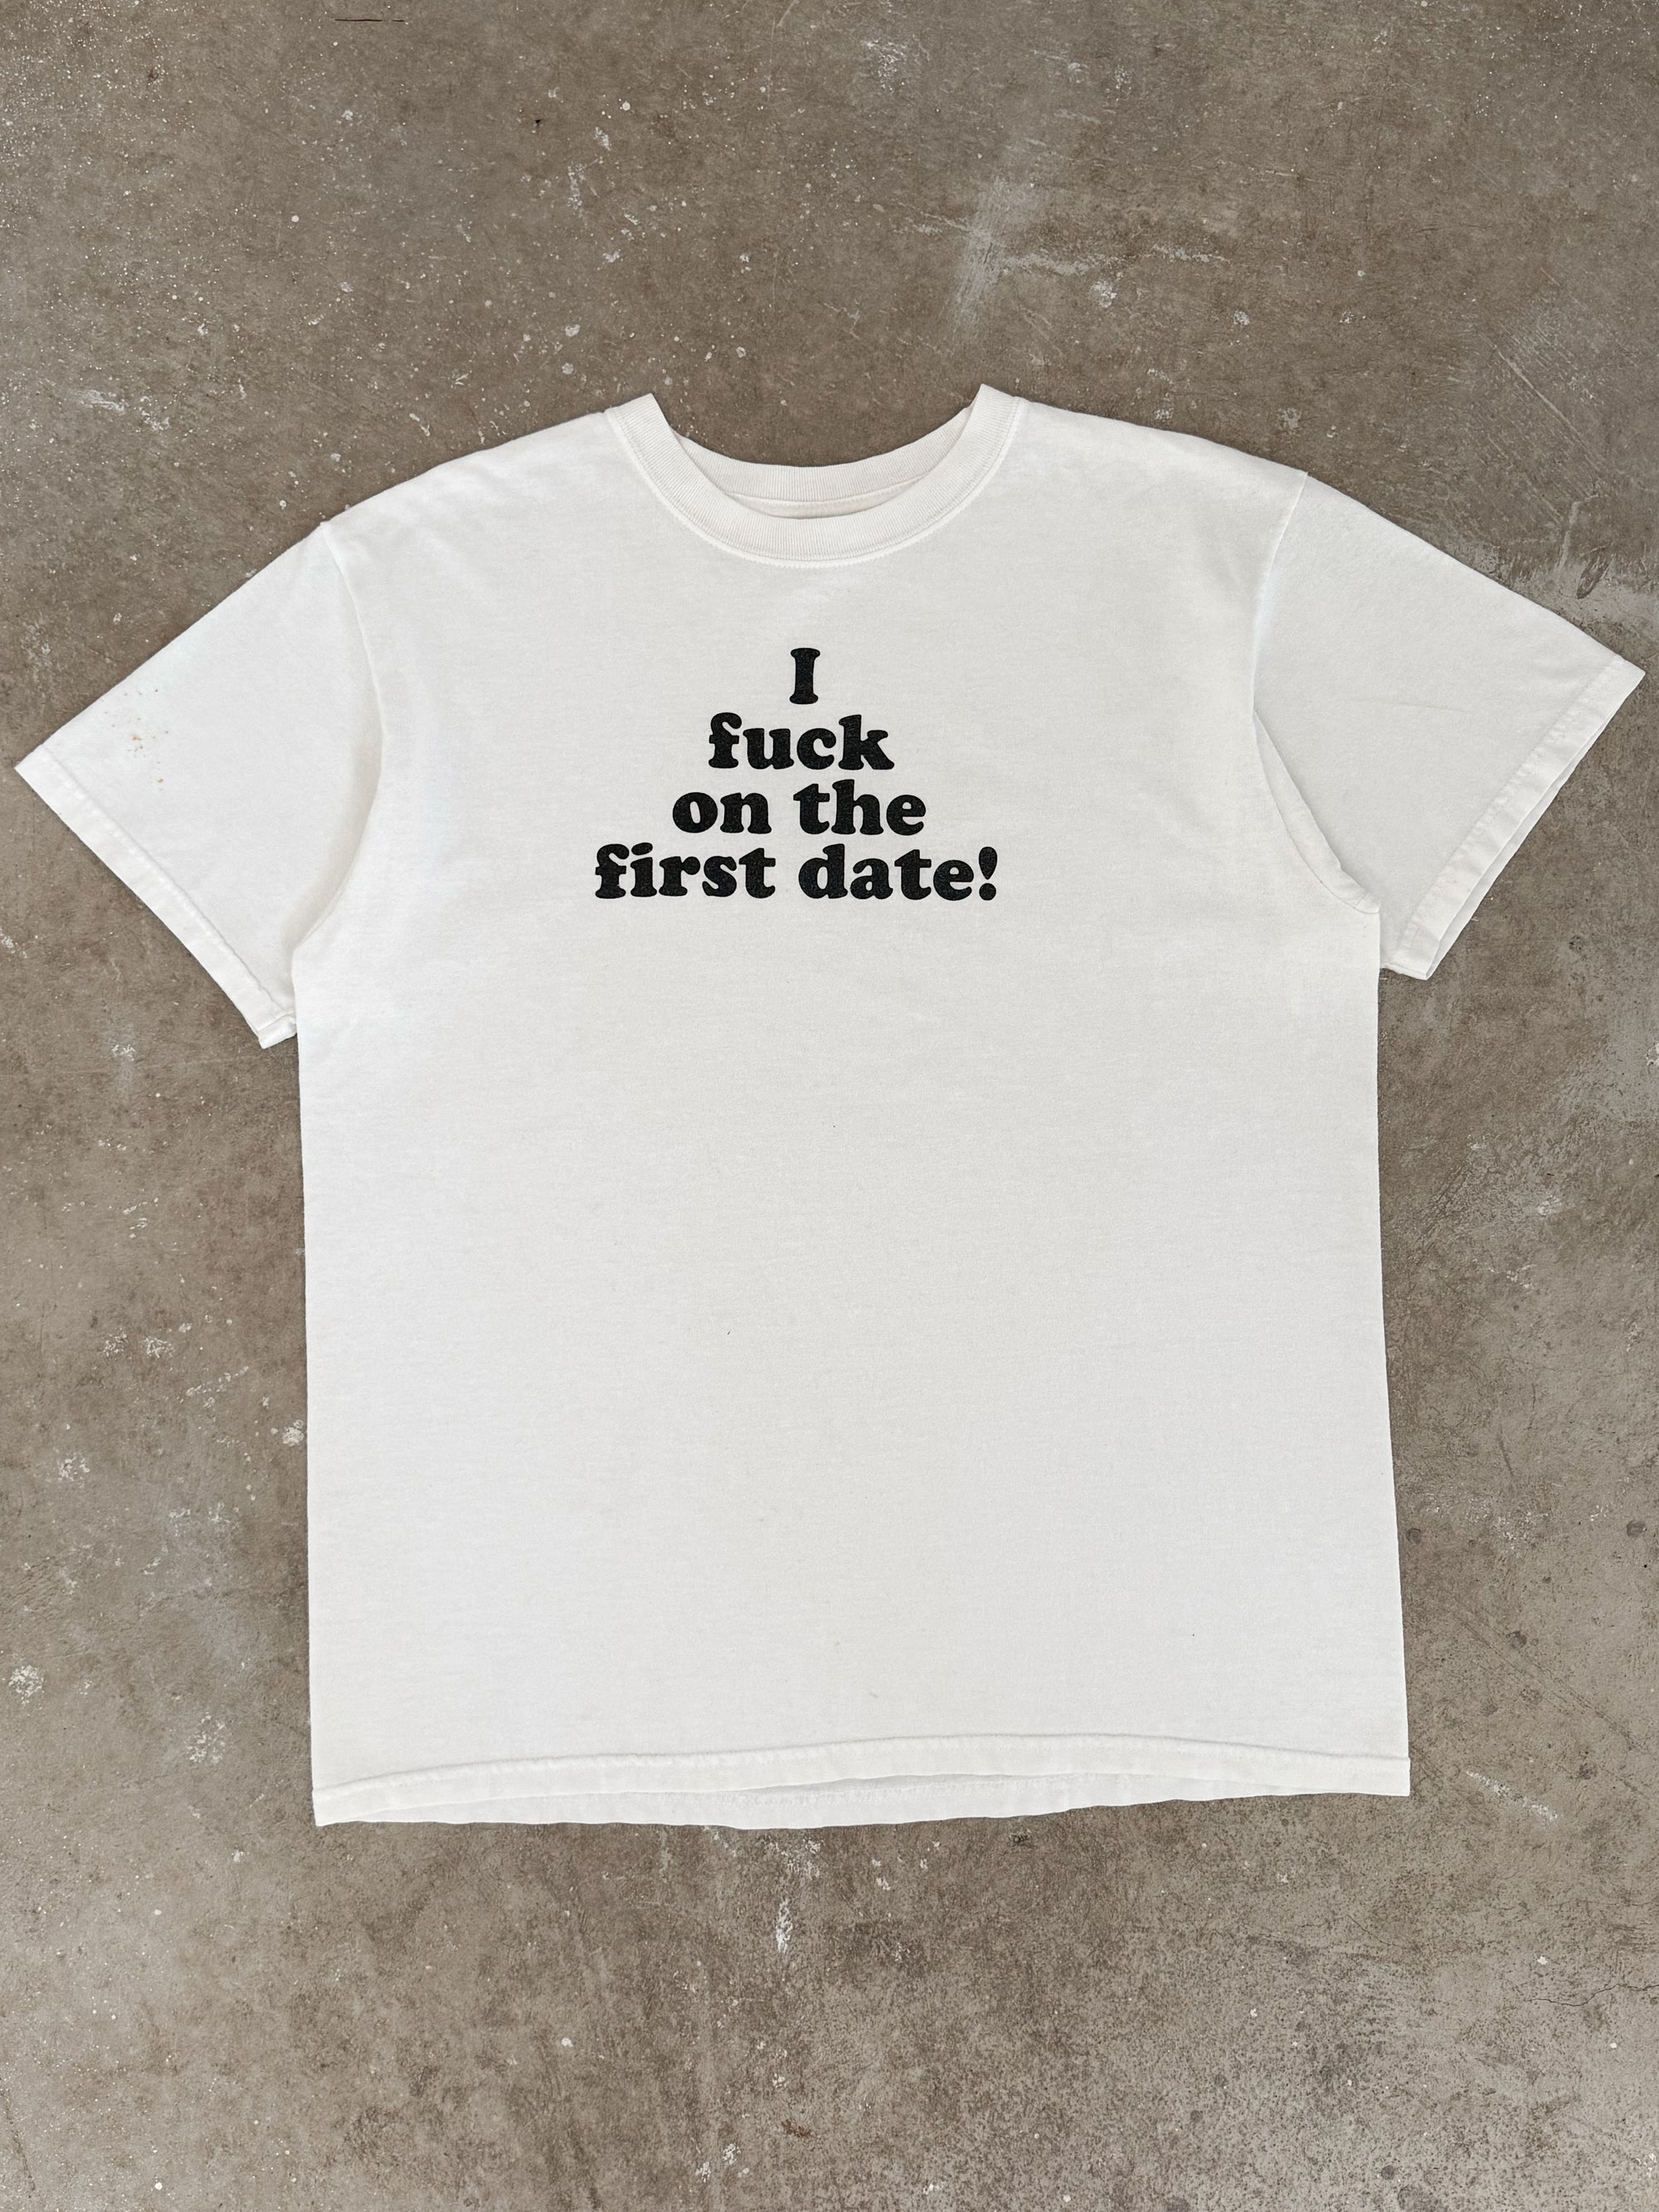 2000s/10s "I Fuck On The First Date" Tee (L)